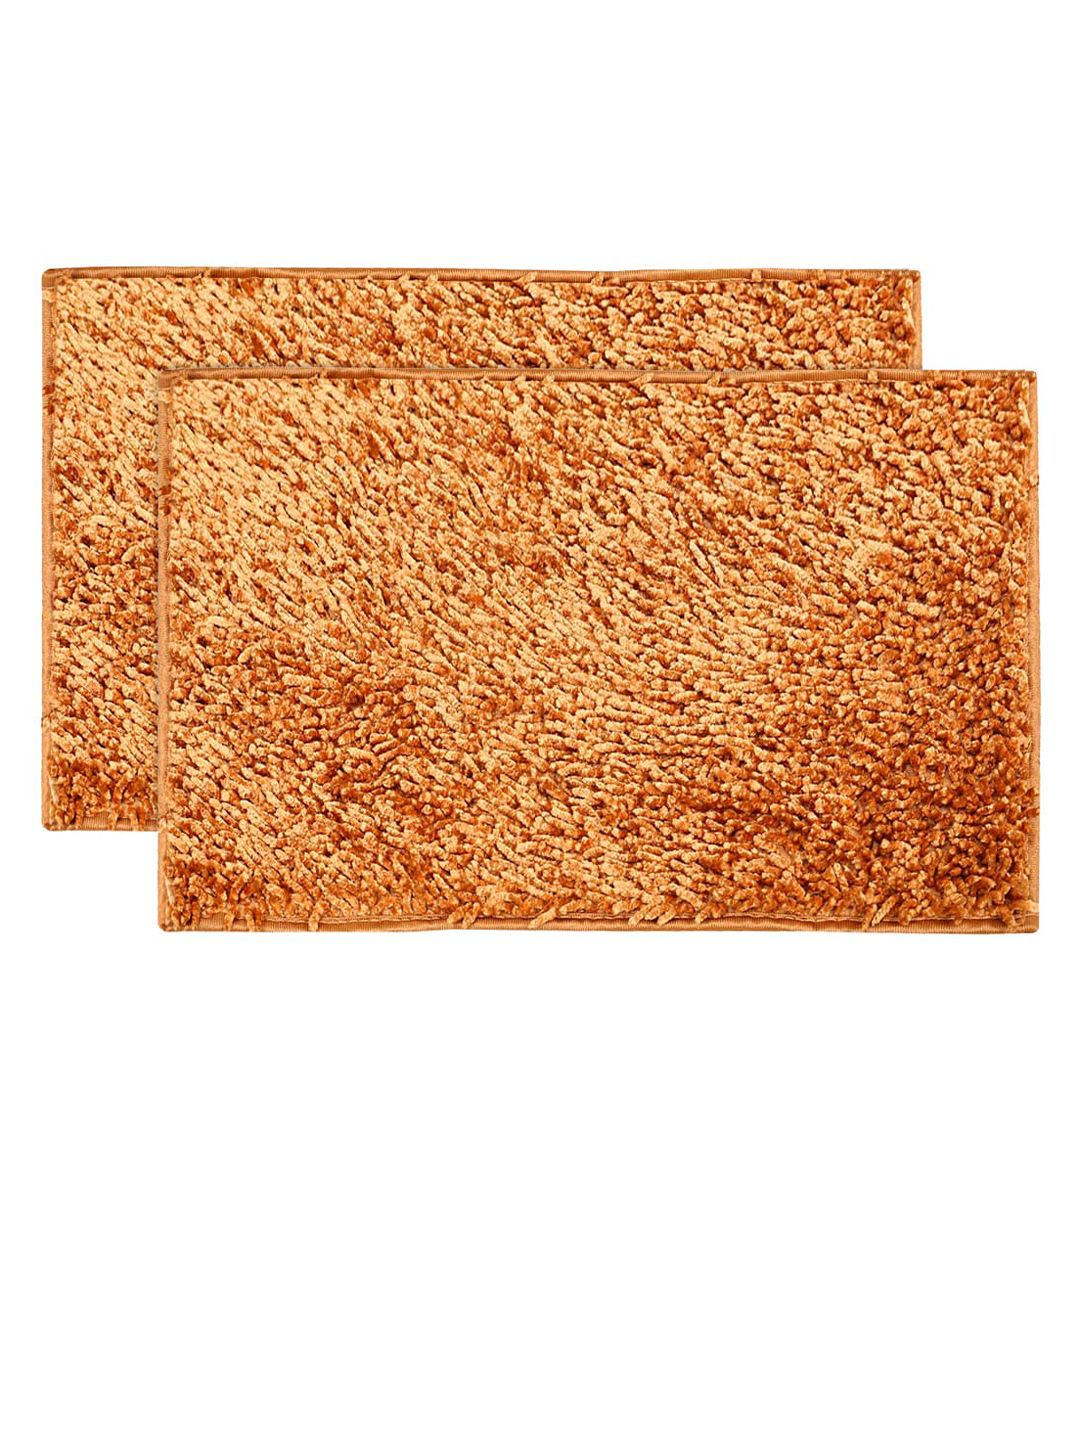 Kuber Industries Set Of 2 Gold-Toned Solid Shaggy Anti-Skid Doormats Price in India